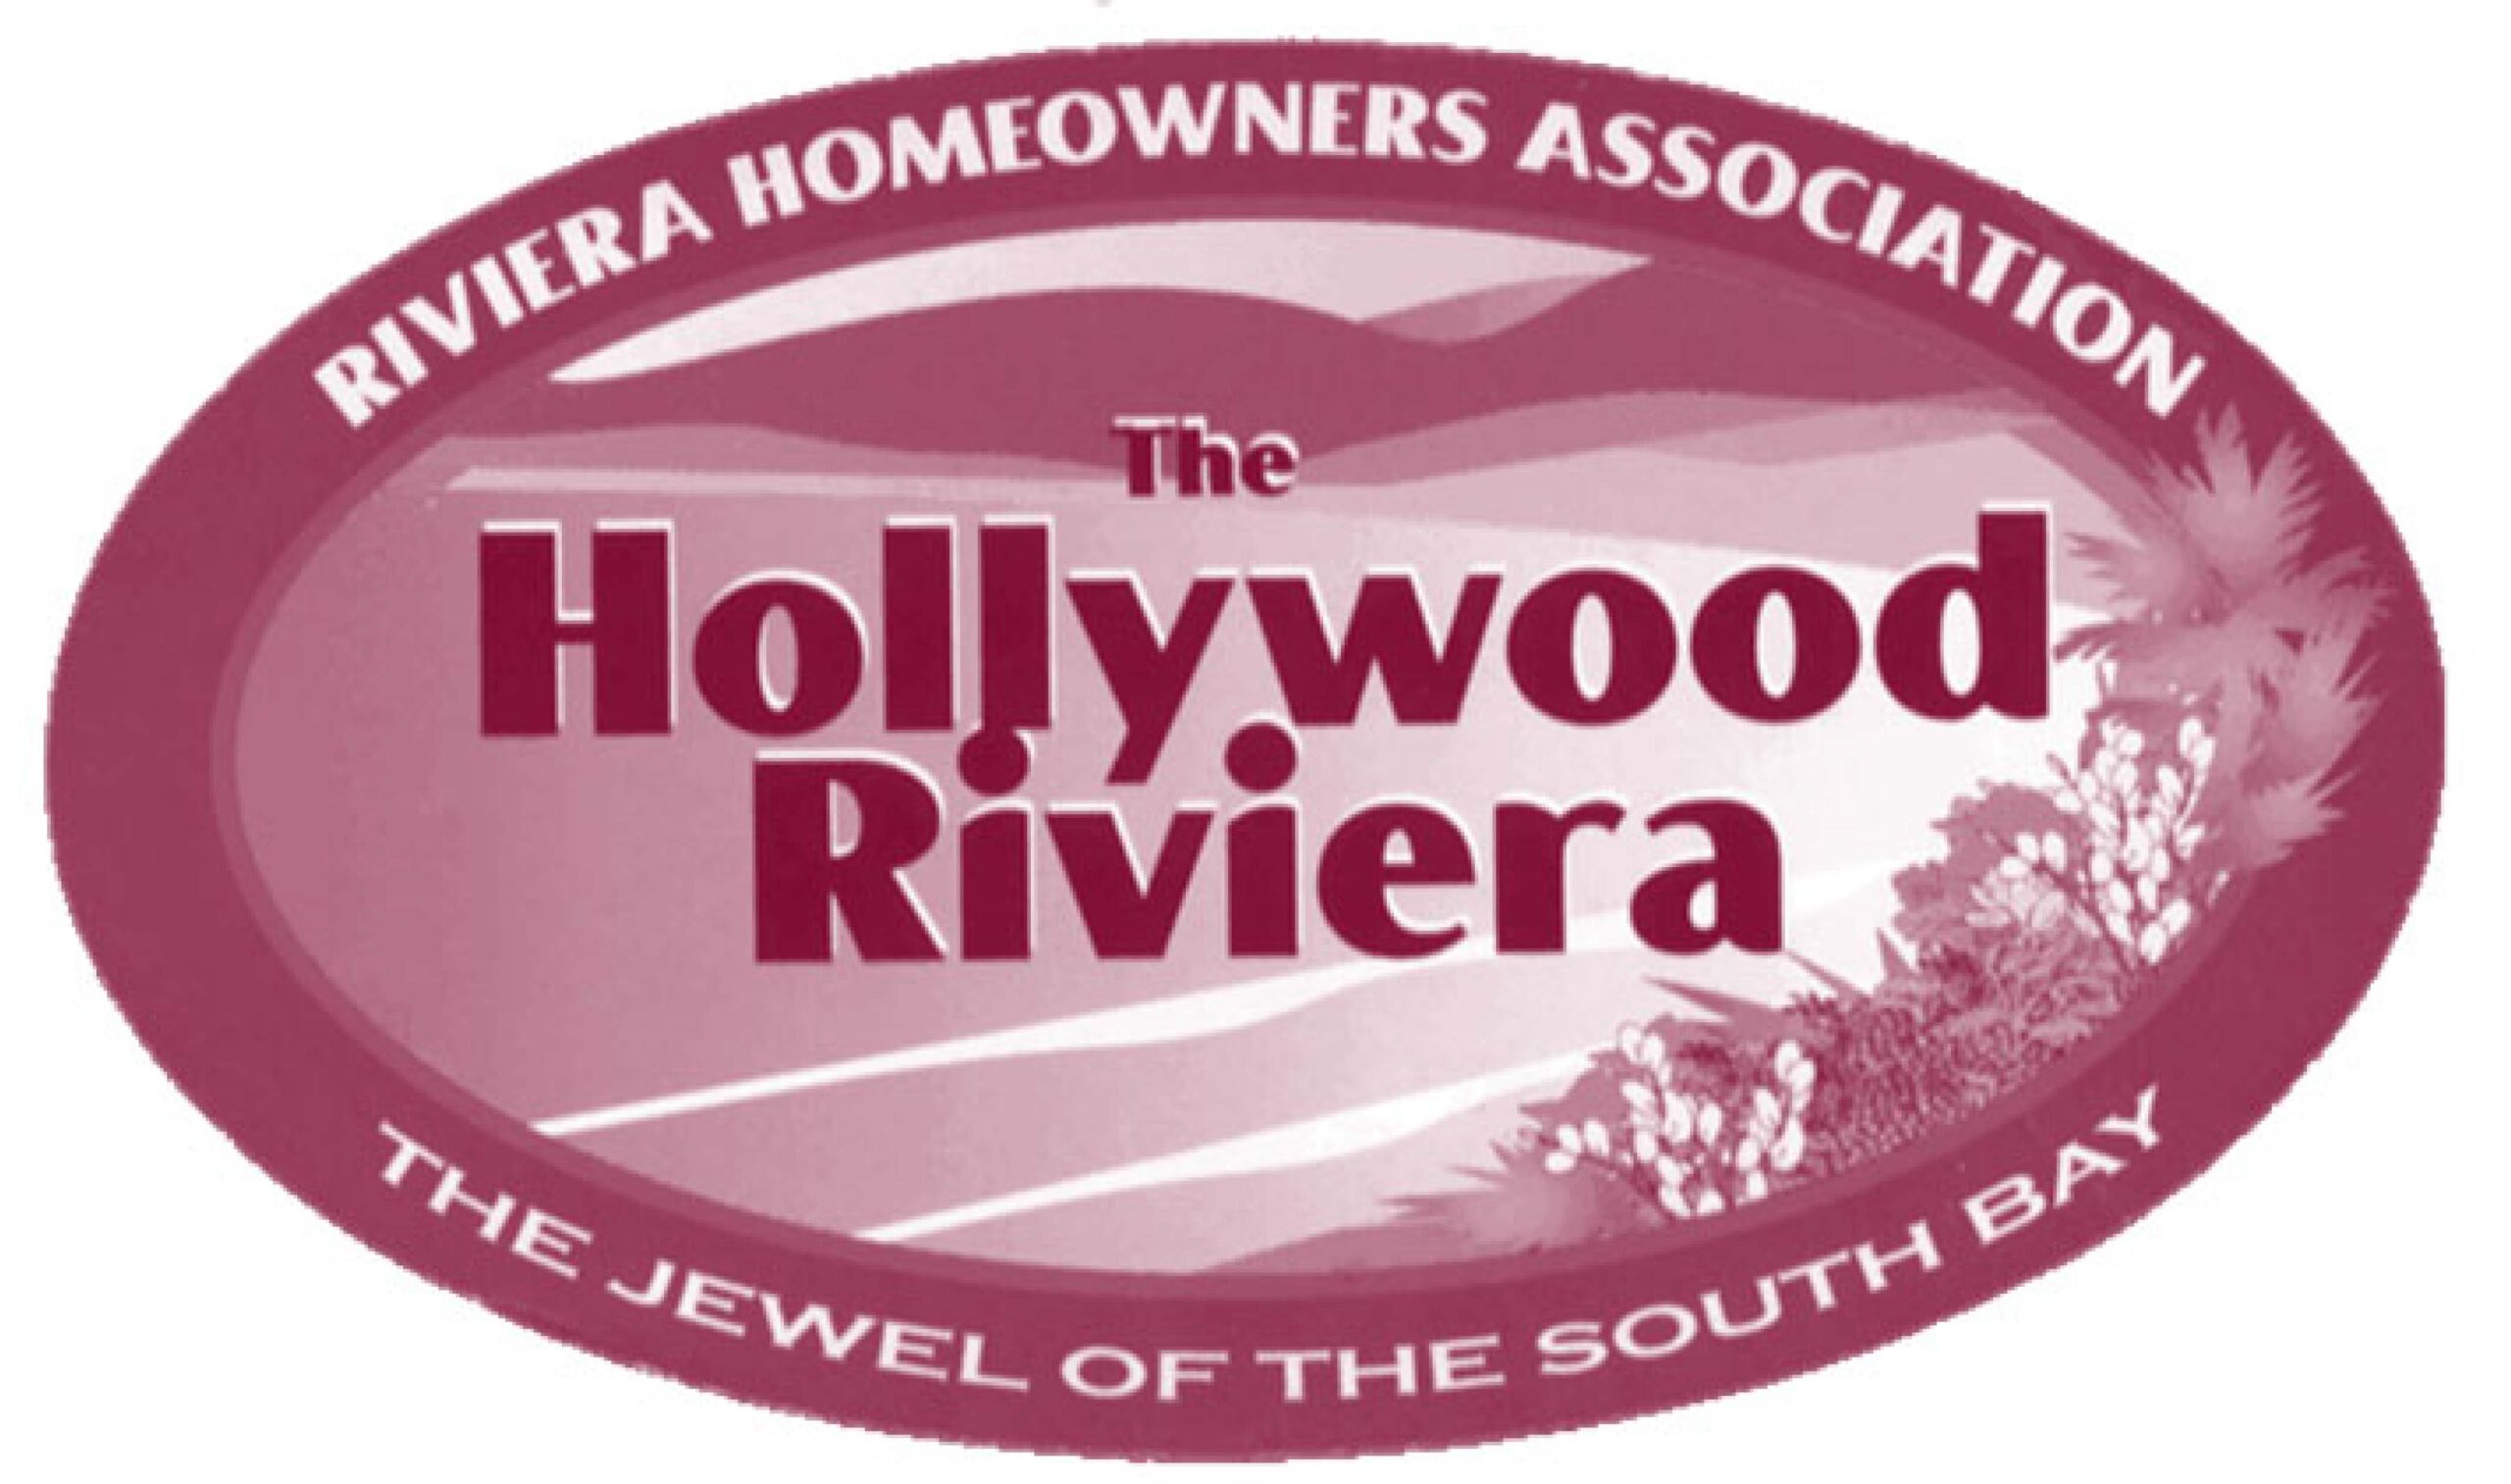 riviera home owners association, hollywood riviera, jewel of the south bay, south bay, los angeles